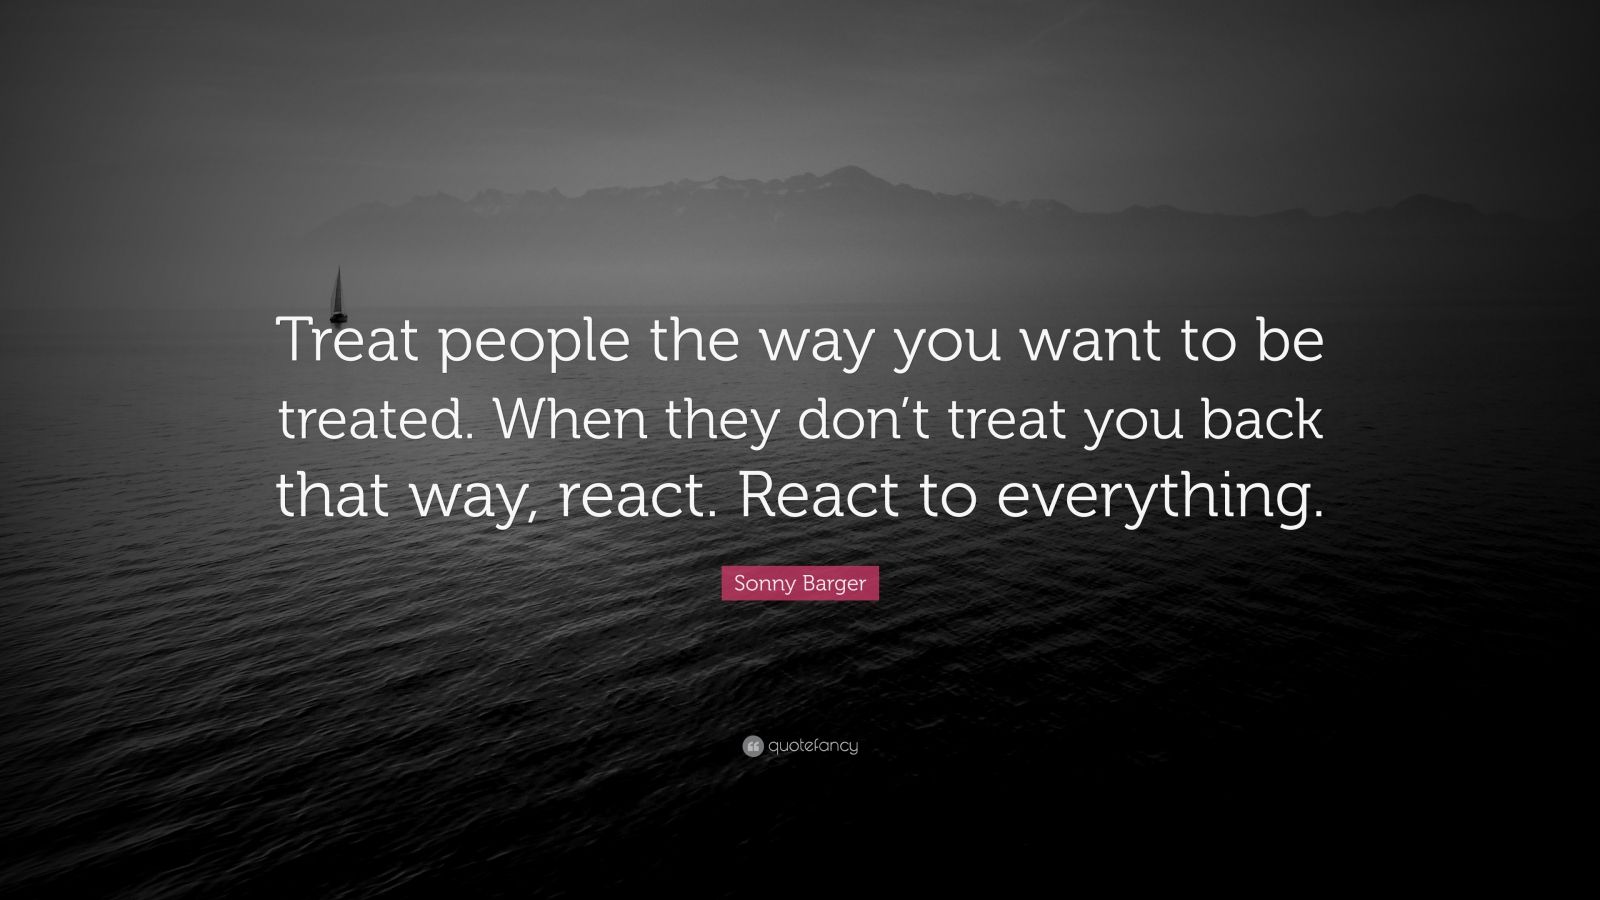 Sonny Barger Quote: “Treat people the way you want to be treated. When ...